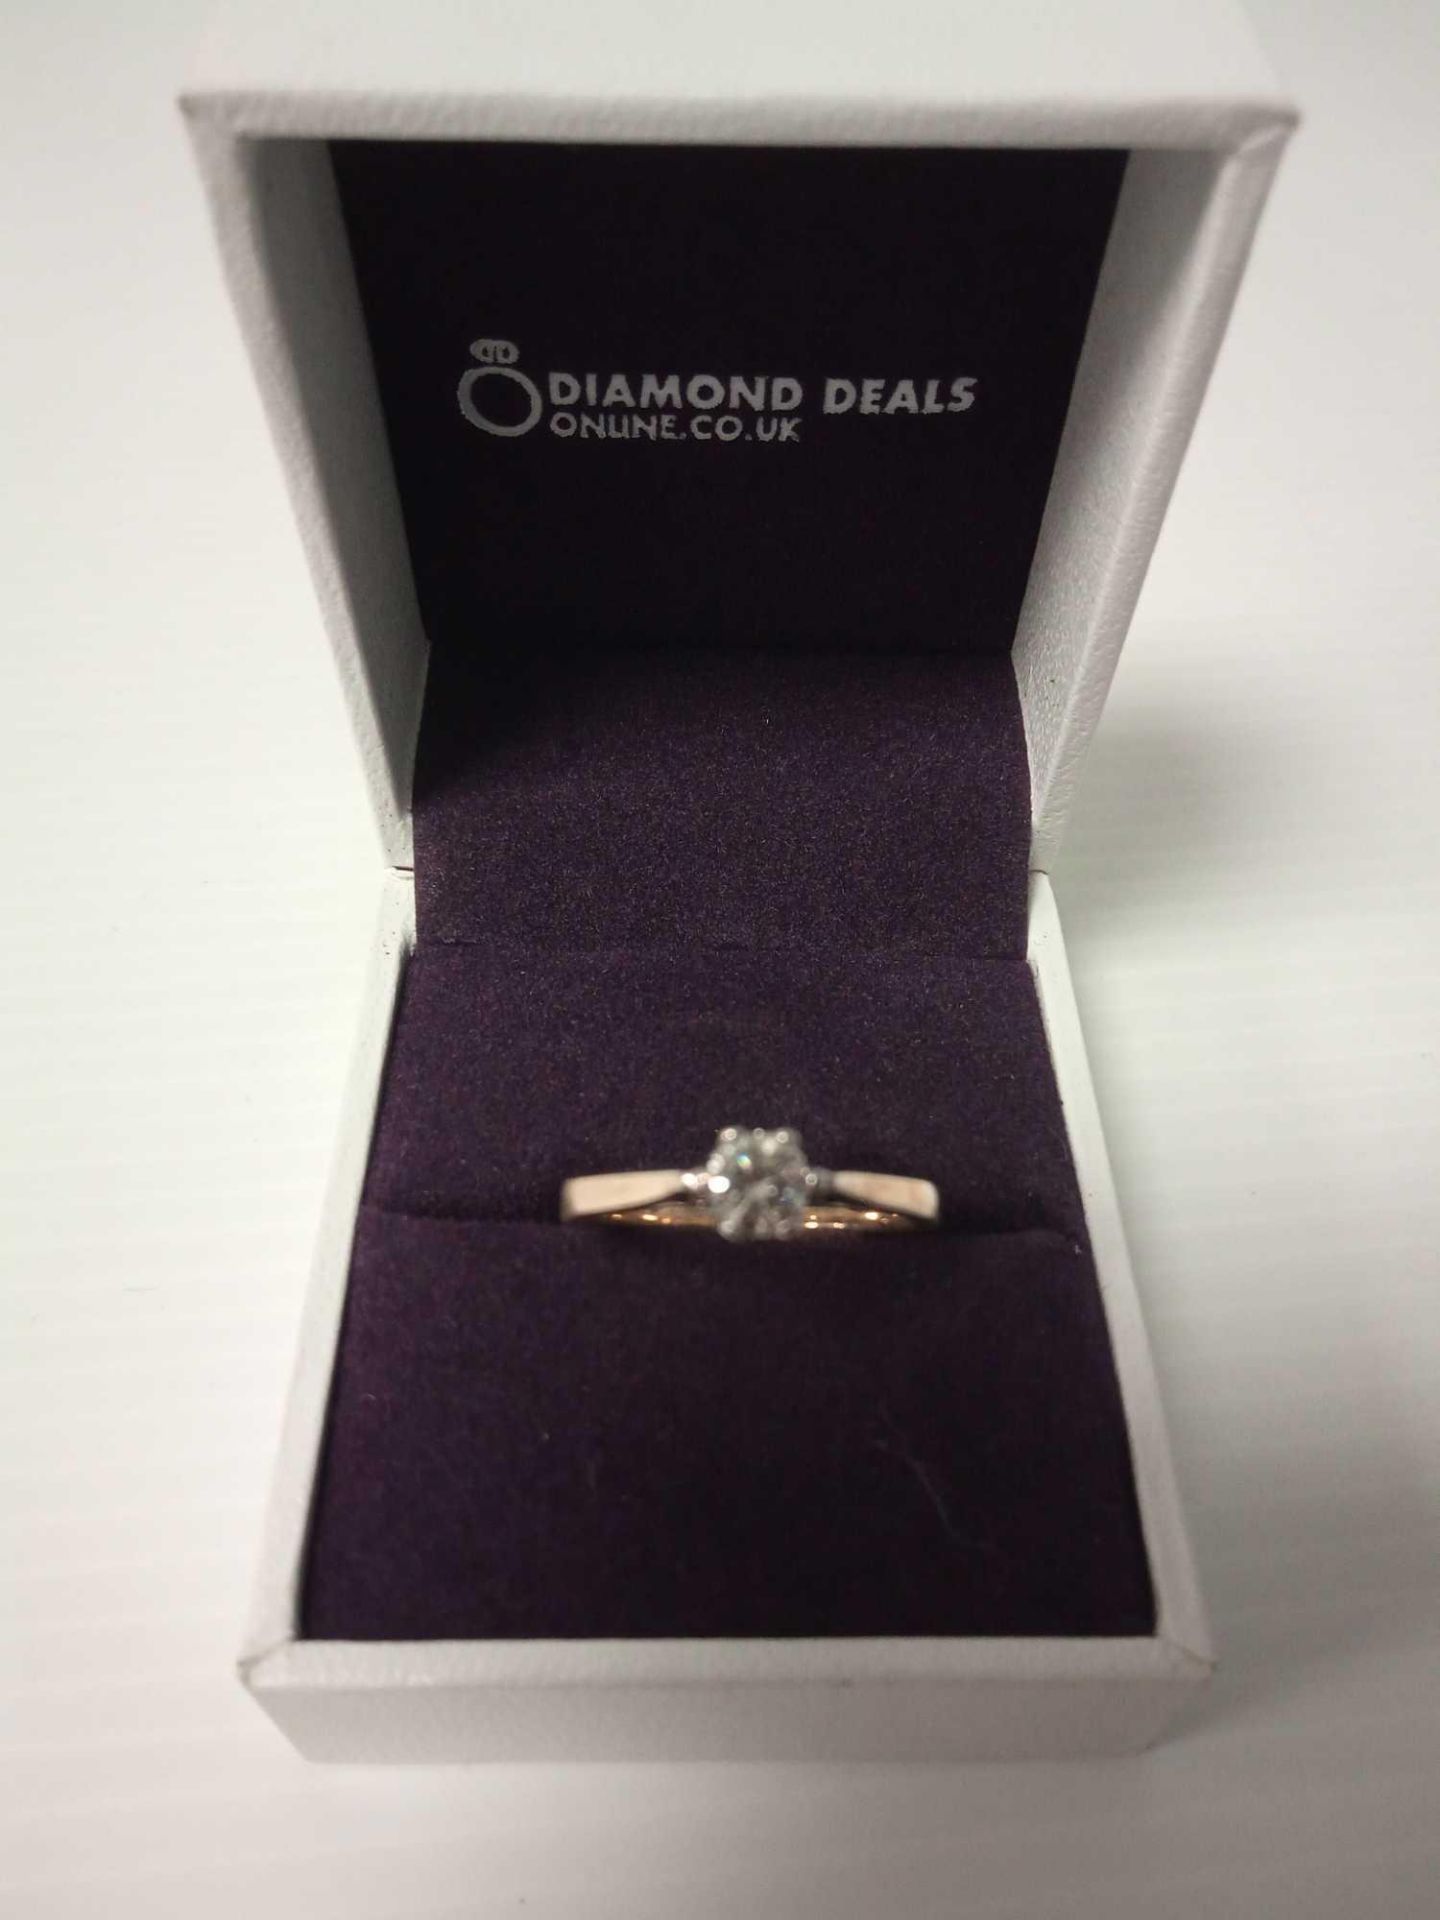 RRP £635 Boxed 9K White Gold Diamond Solitaire Engagement Ring With 0.16Ct Of Diamond (Appraisals - Image 3 of 3